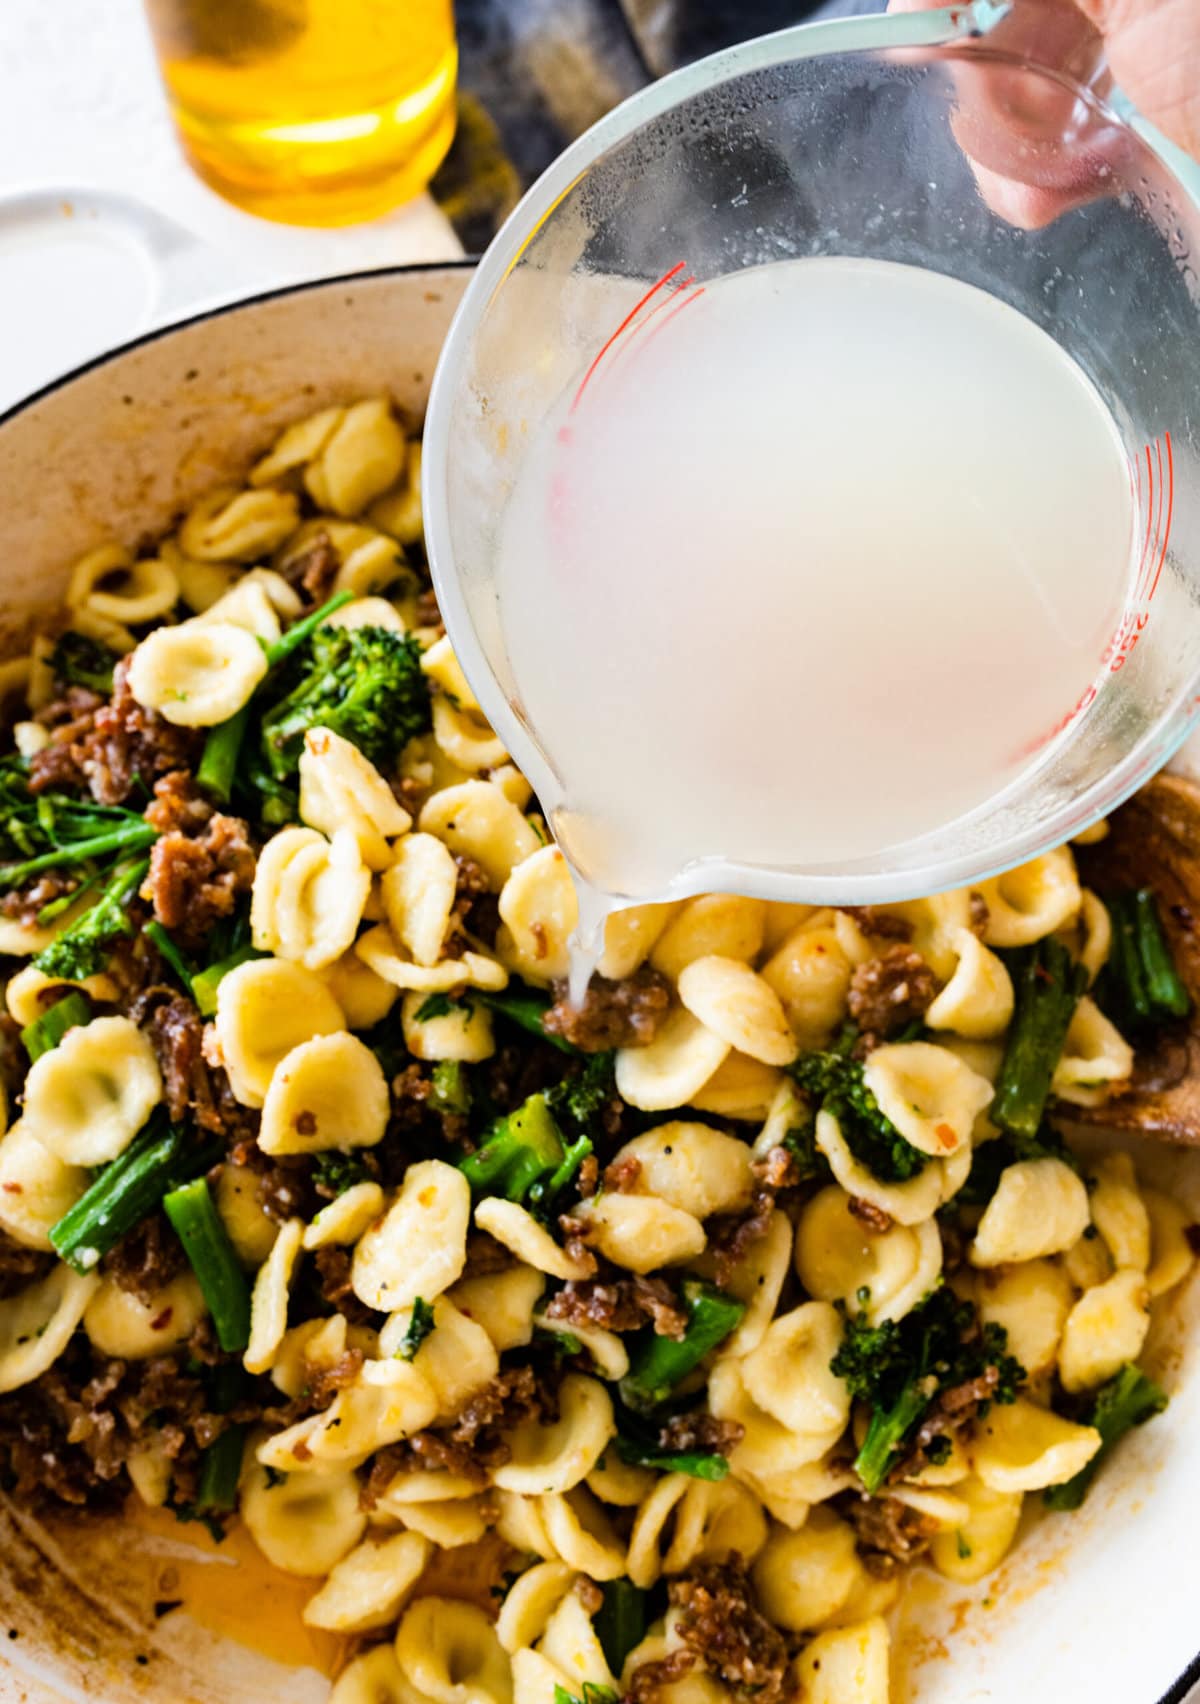 how to make Easy Orecchiette with Sausage and Broccoli- step-by-step: add cooked orecchiette pasta and pasta water to the broccoli to the sausage.